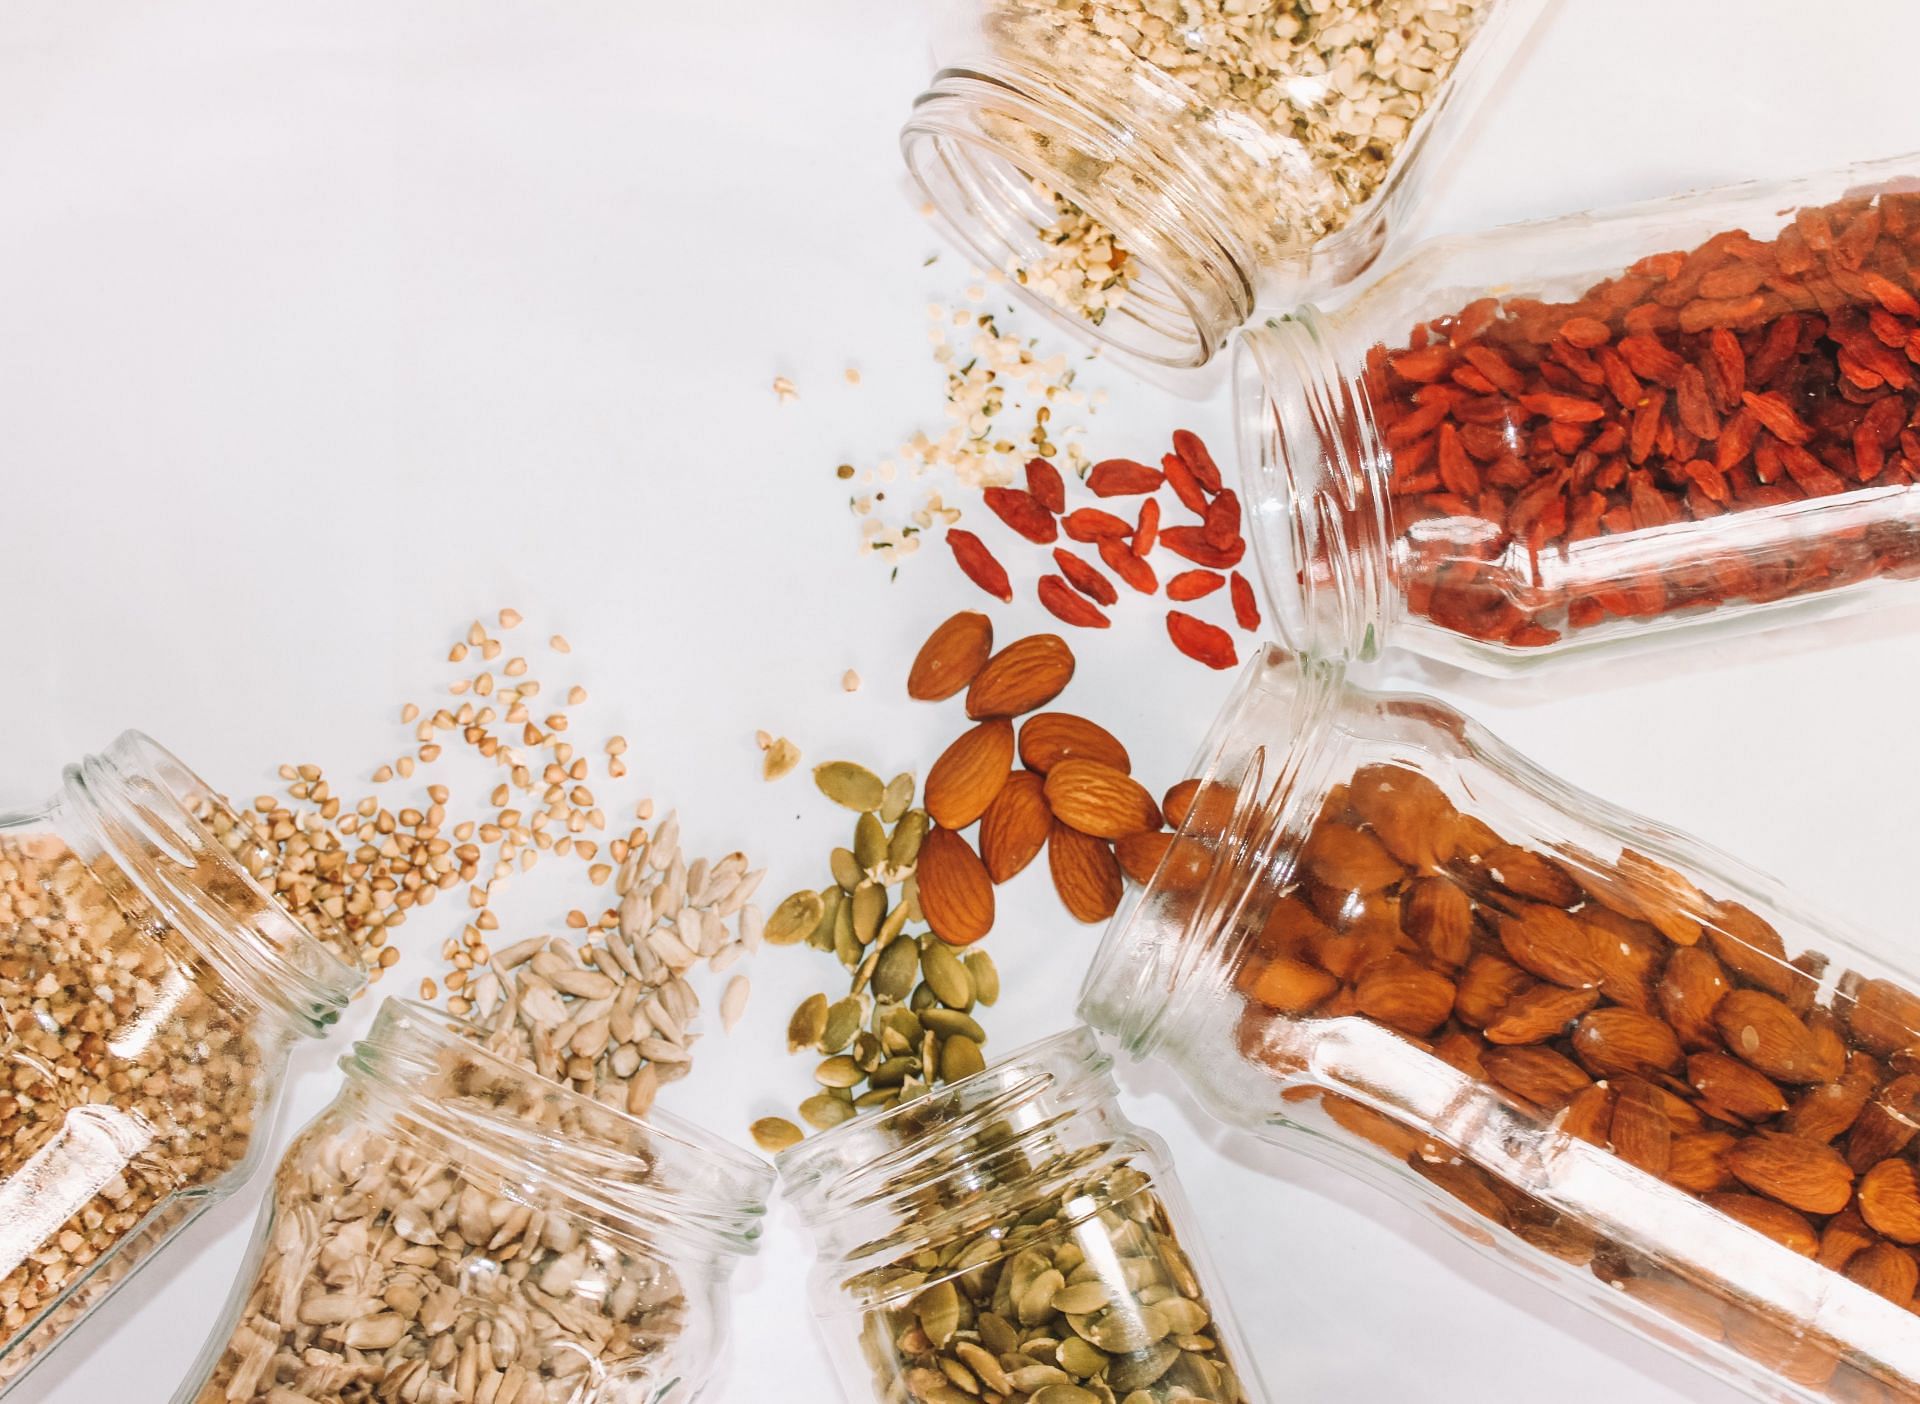 nuts and seeds include healthy fats. (image via unsplash / maddi bazzocco)